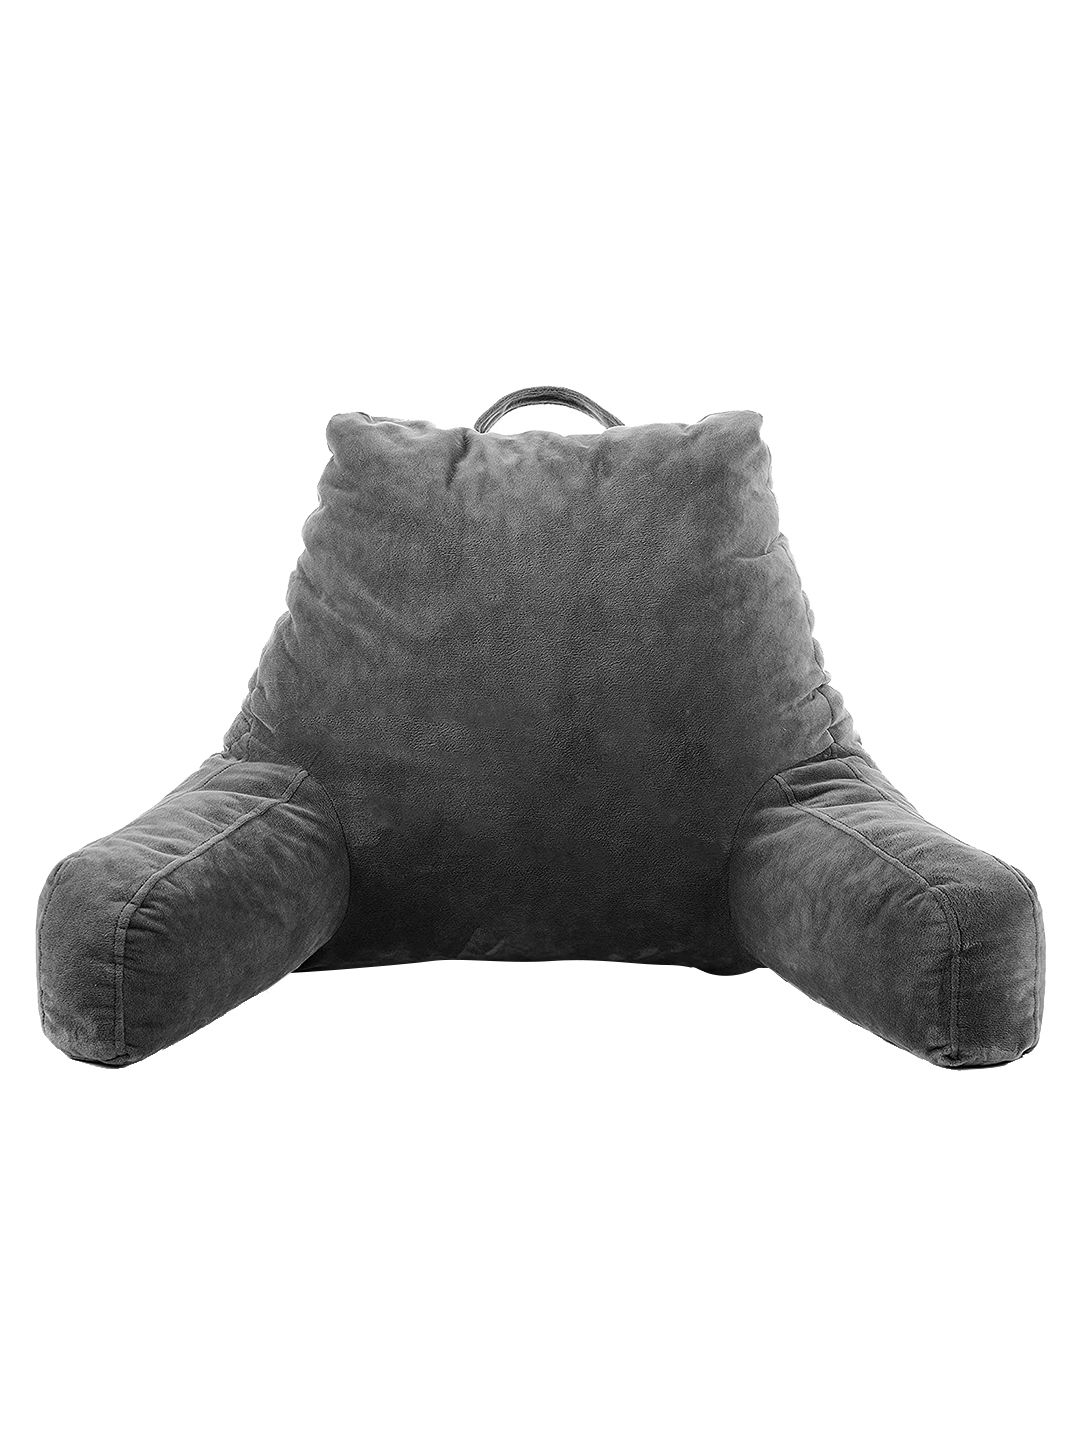 Pum Pum Grey Solid Back Rest Reading Pillow Price in India